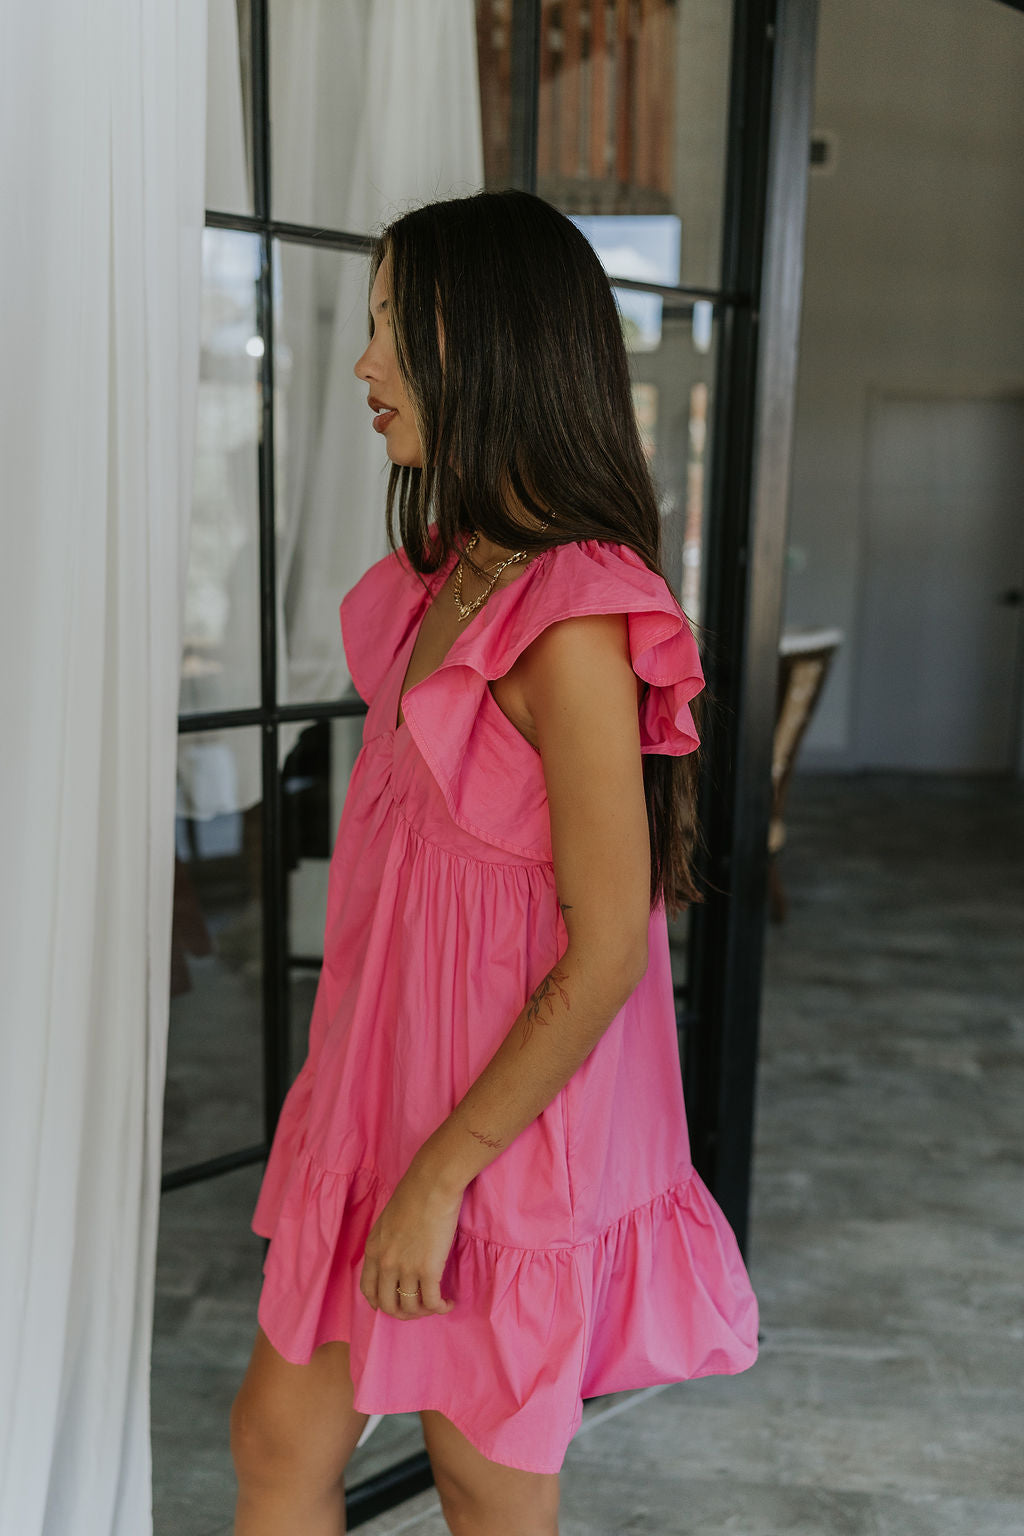 Side view of female model wearing the Alani Pink Ruffle Mini Dress which features Pink Lightweight Fabric, Mini Length, Ruffle Hem, Plunge Neckline and Ruffle Straps